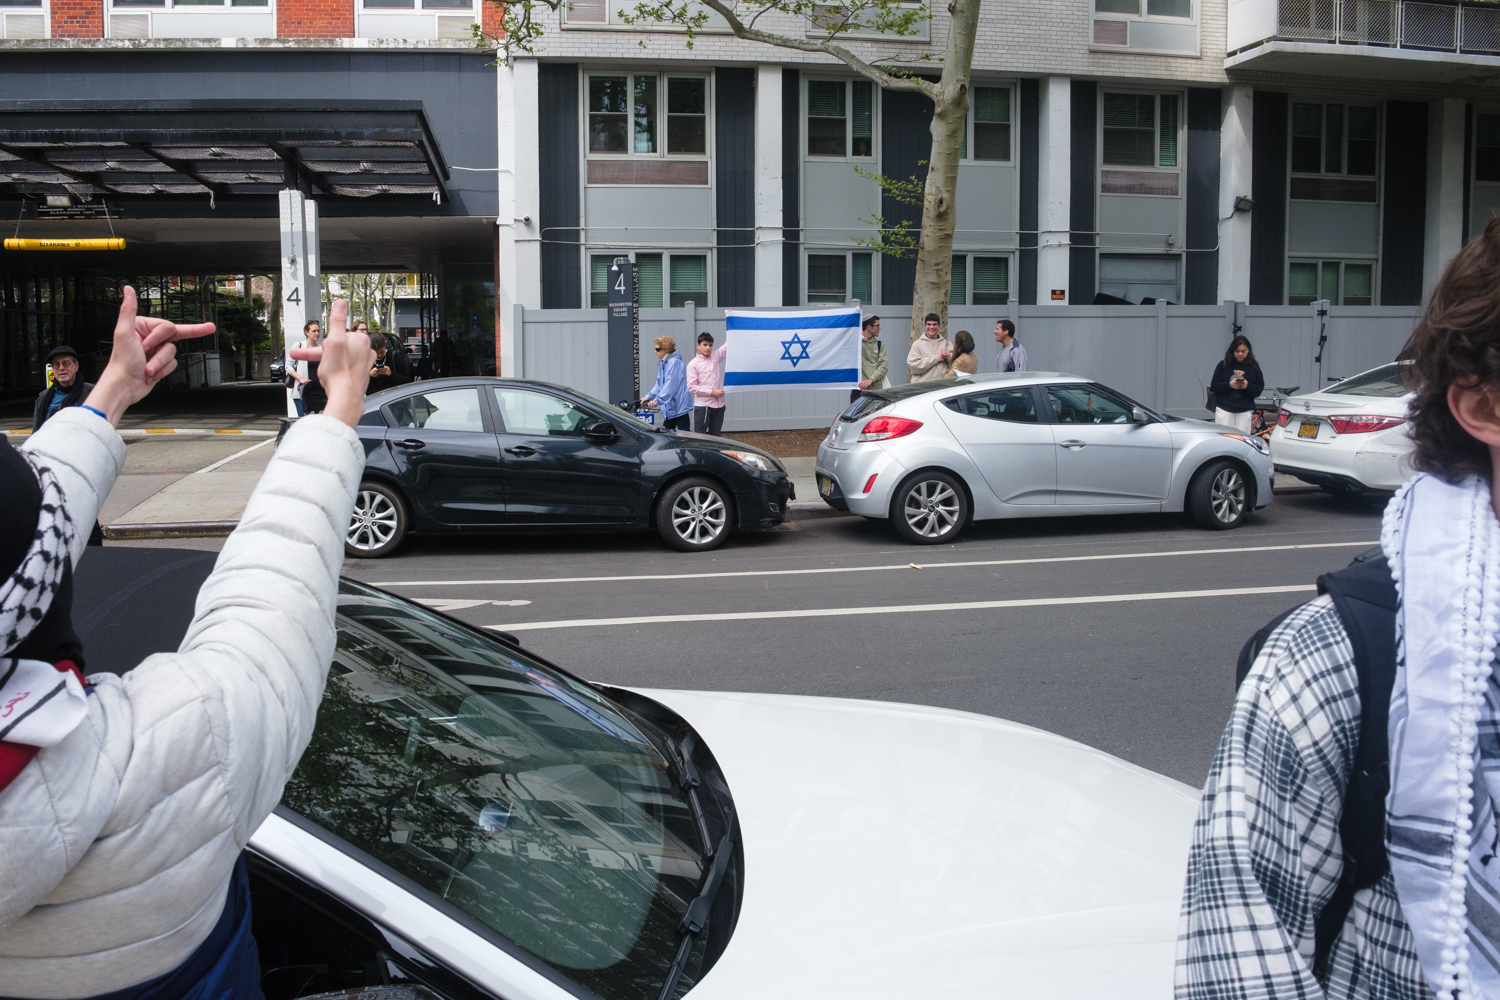 A protester points their middle fingers at pro-Israeli counterprotesters across the street.